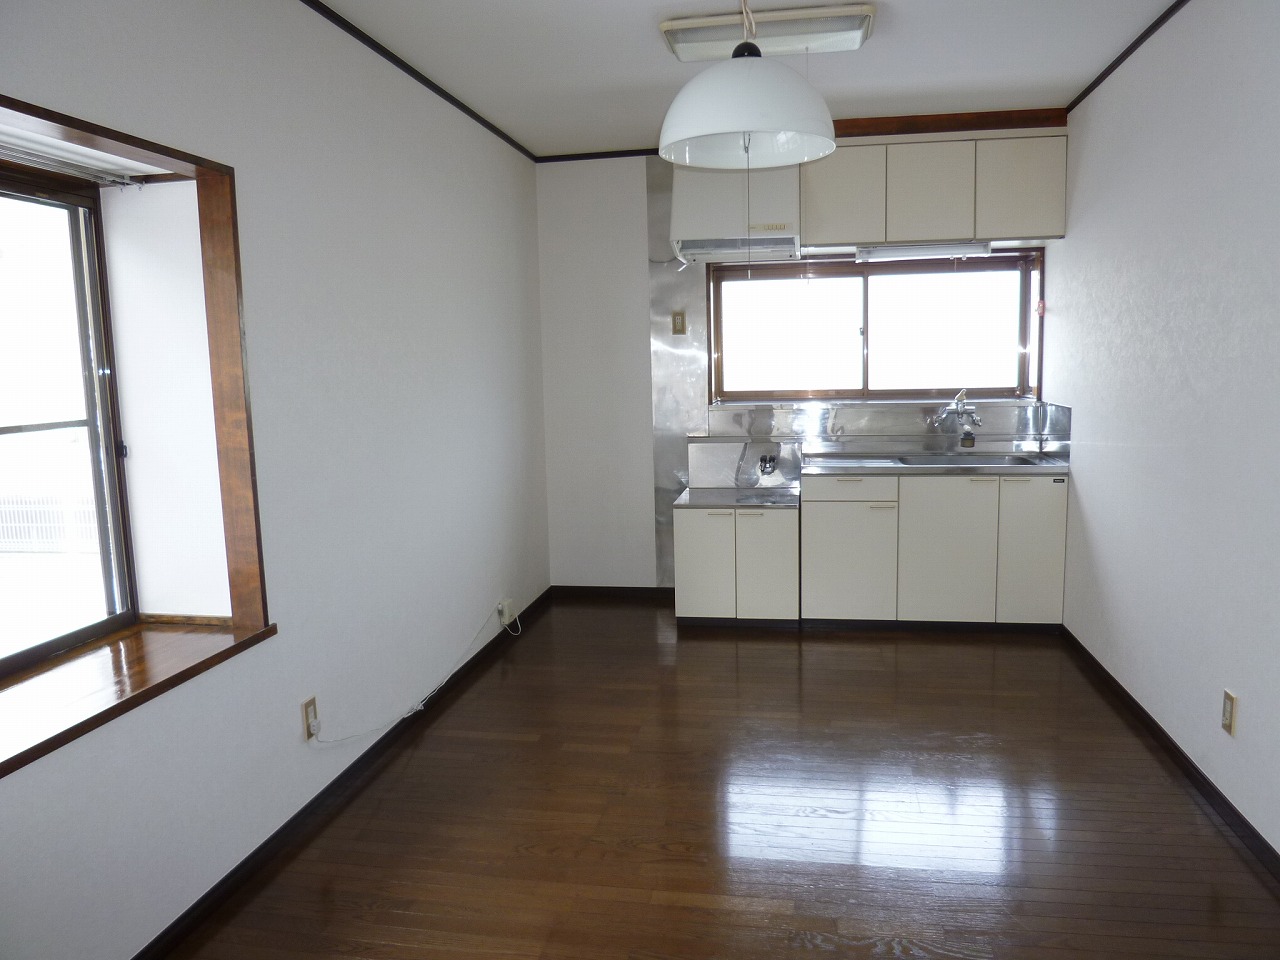 Kitchen.  ※ It is a photograph of the outbuilding